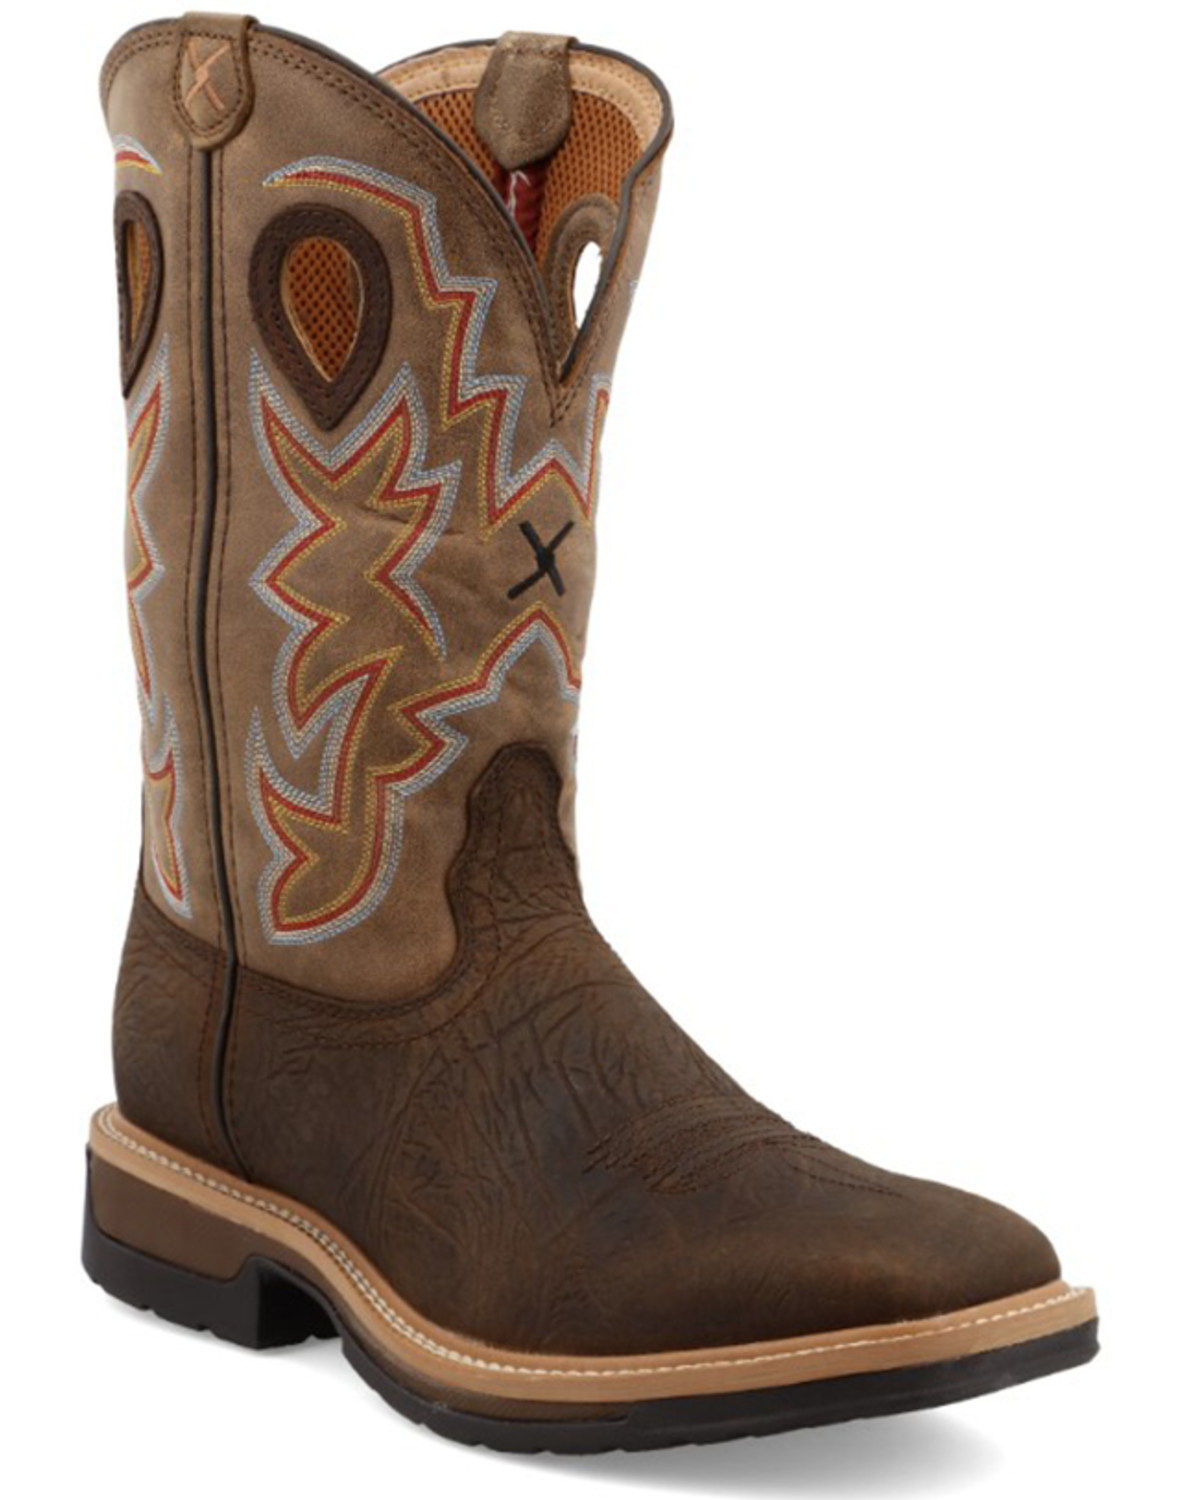 Twisted X Men's Lite Western Work Boots - Broad Square Toe